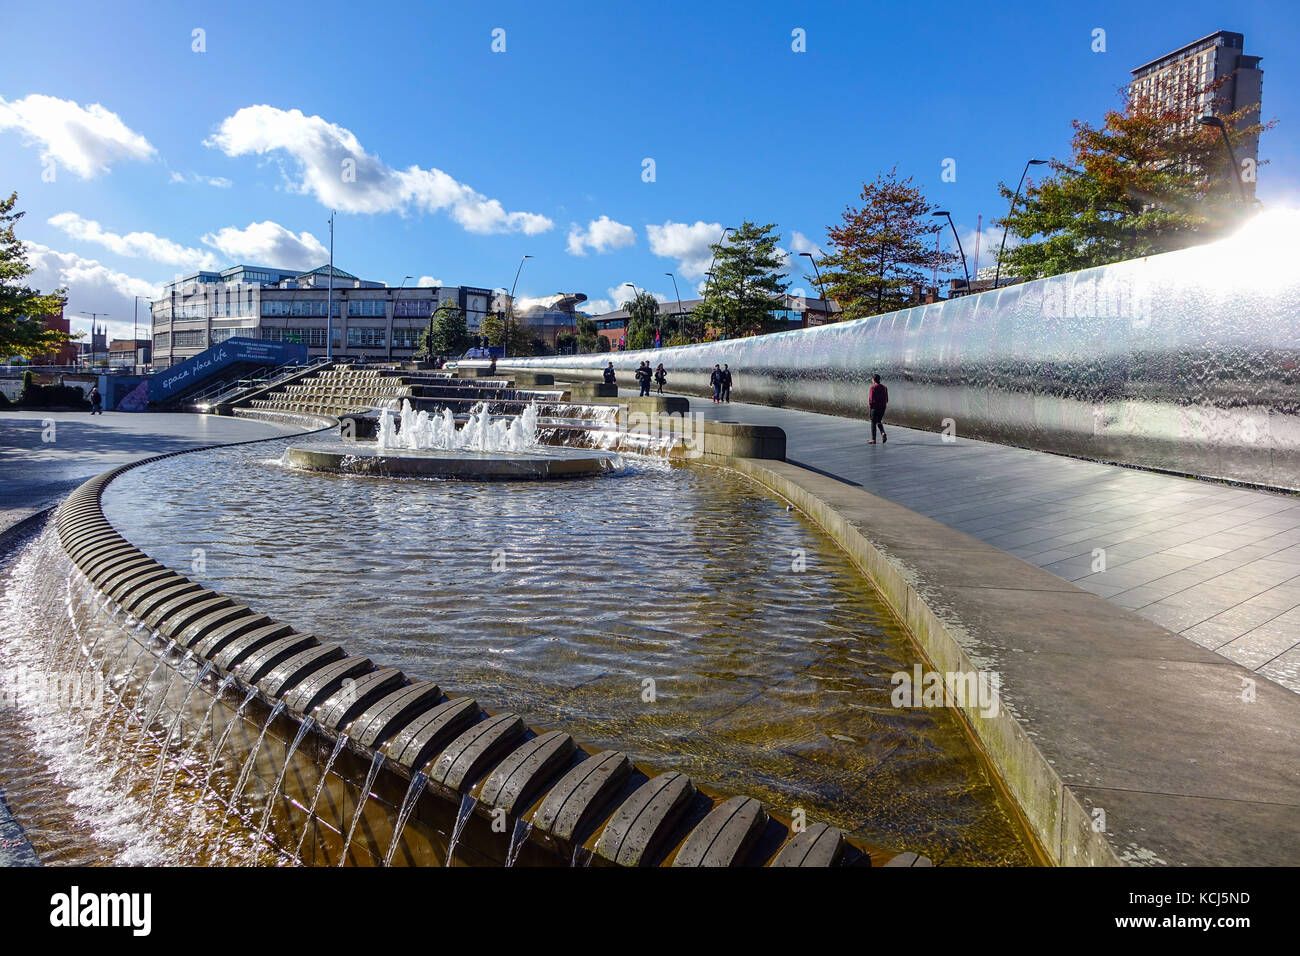 Sheffield, UK railways station, with fountains and cascades Stock Photo